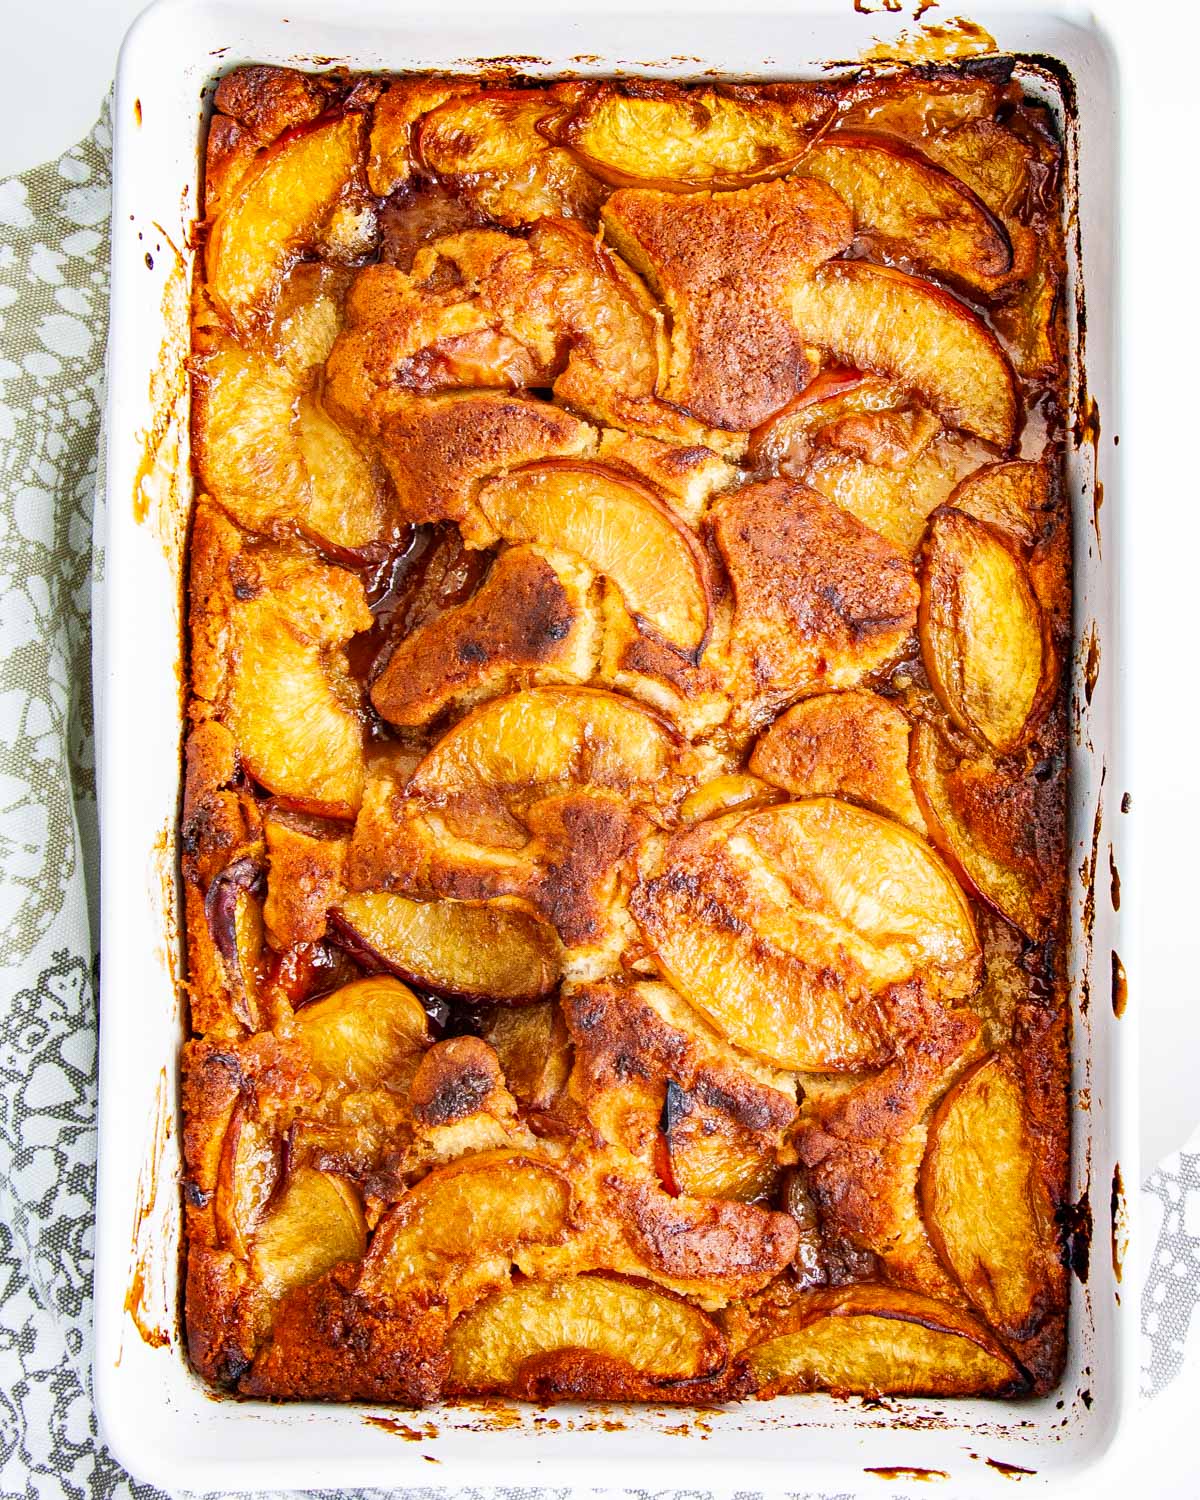 overhead shot of a peach cobbler in a baking dish fresh out of the oven